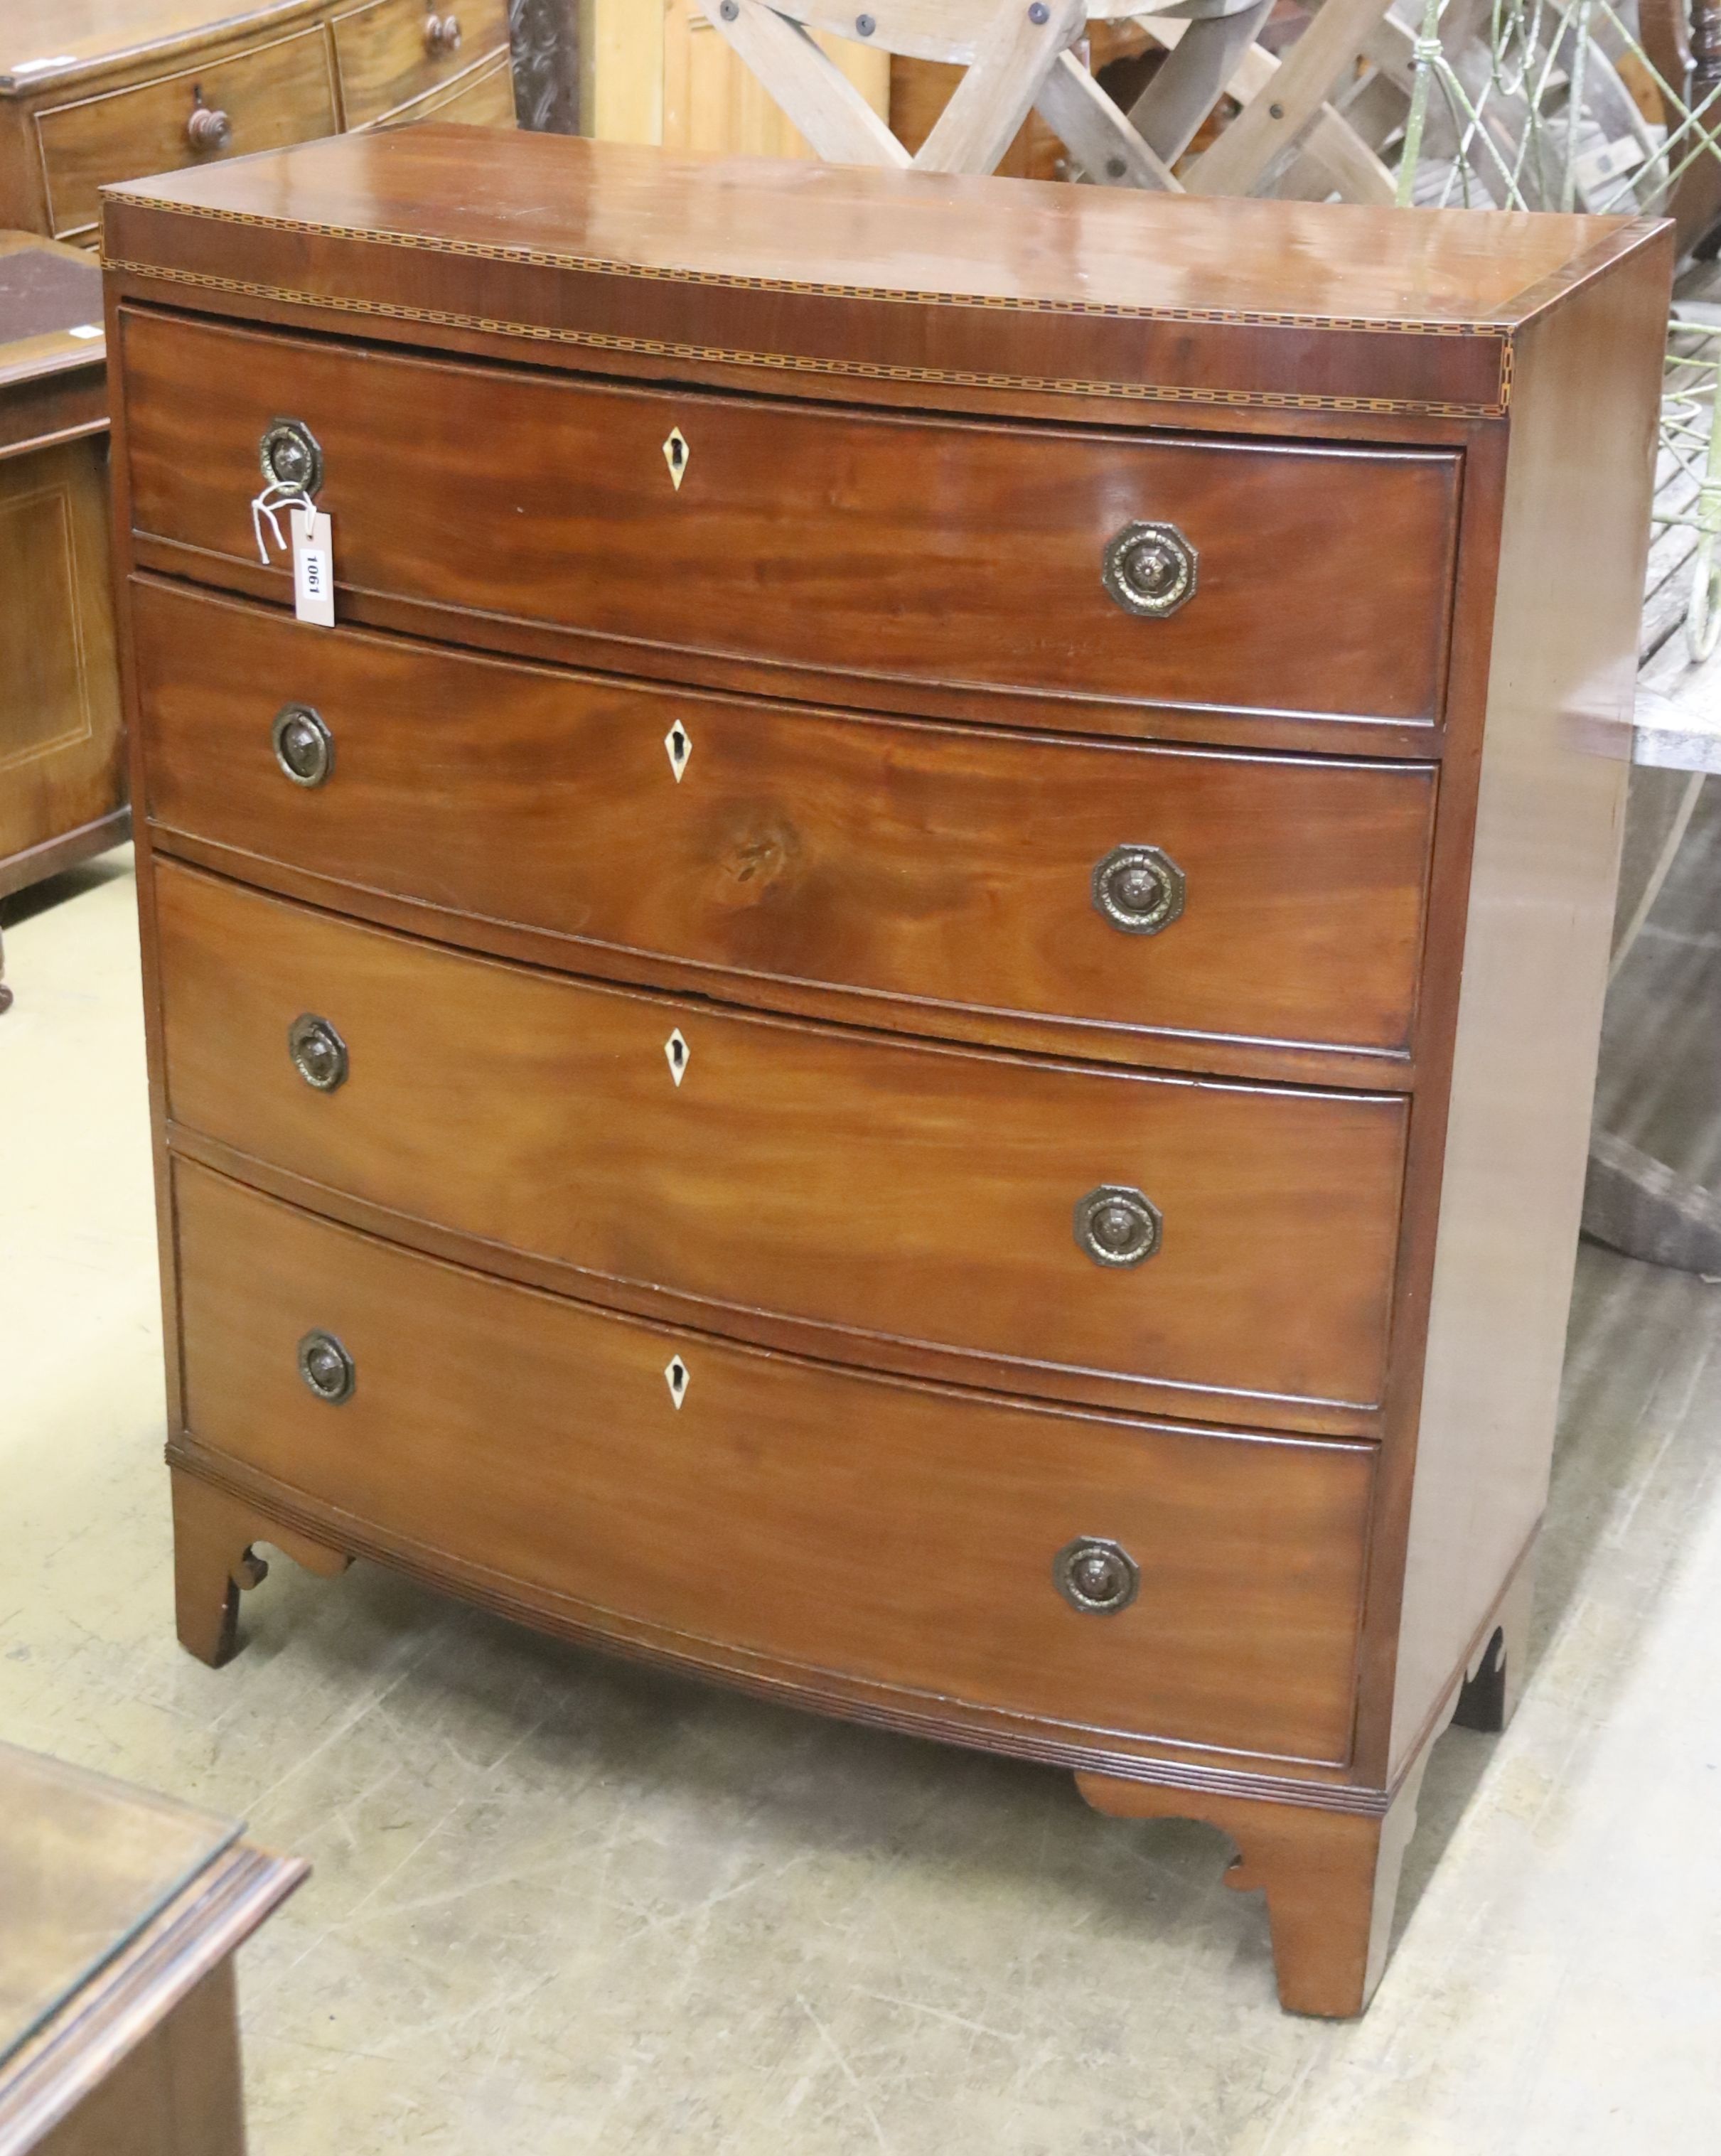 A Regency banded mahogany bowfront chest of drawers, width 92cm, depth 45cm, height 109cm